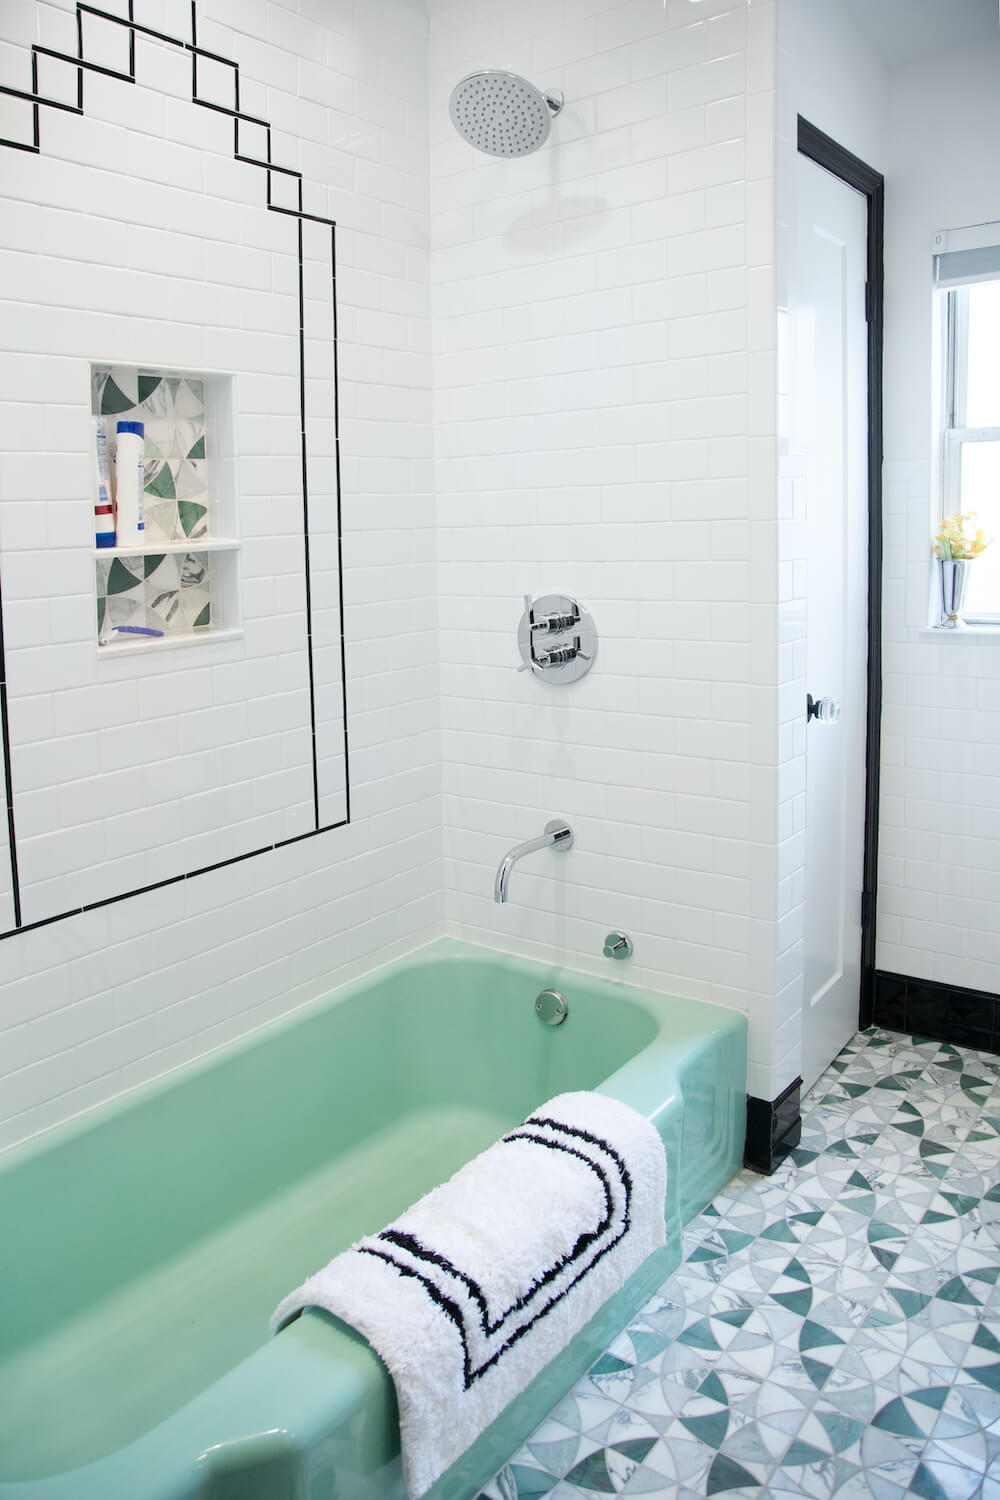 White tiled bathroom with green tub and patterned tiling